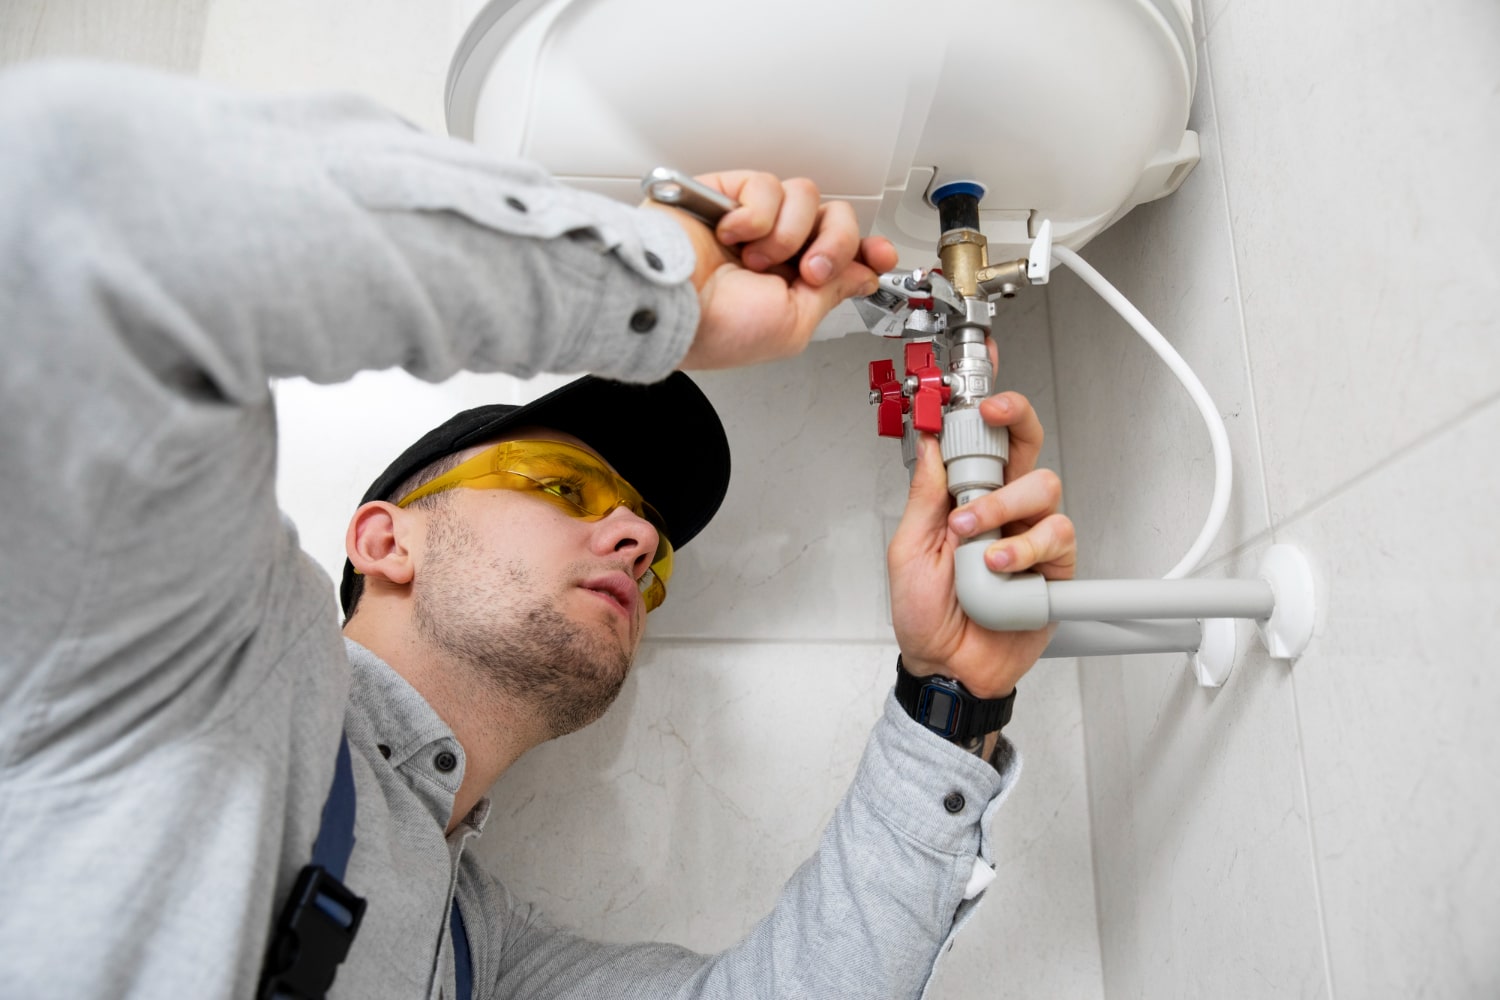 A Guide to Common Water Heater Problems and How to Troubleshoot Them